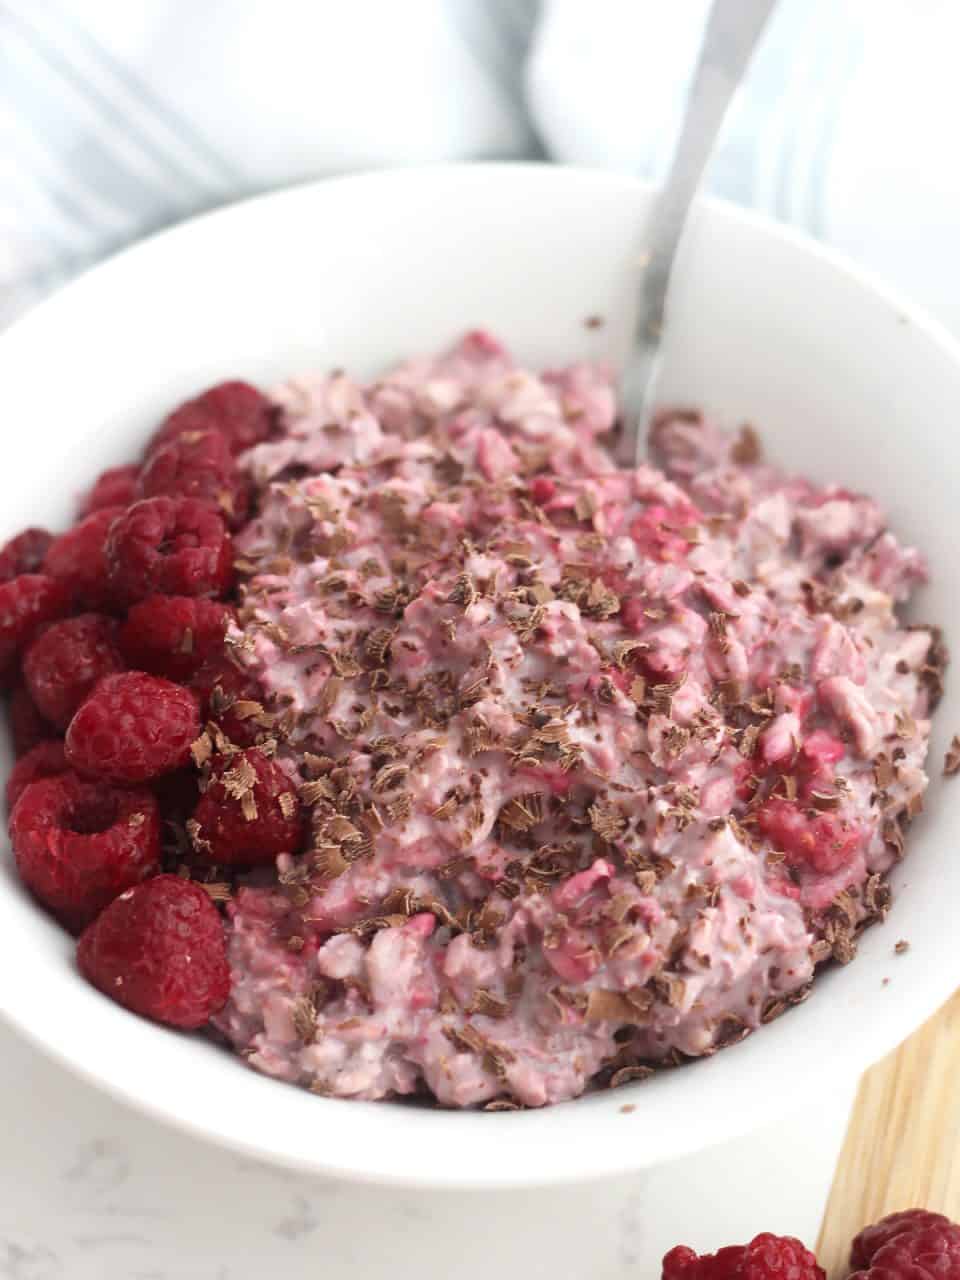 A spoon in a bowl of overnight oats with fresh raspberries.